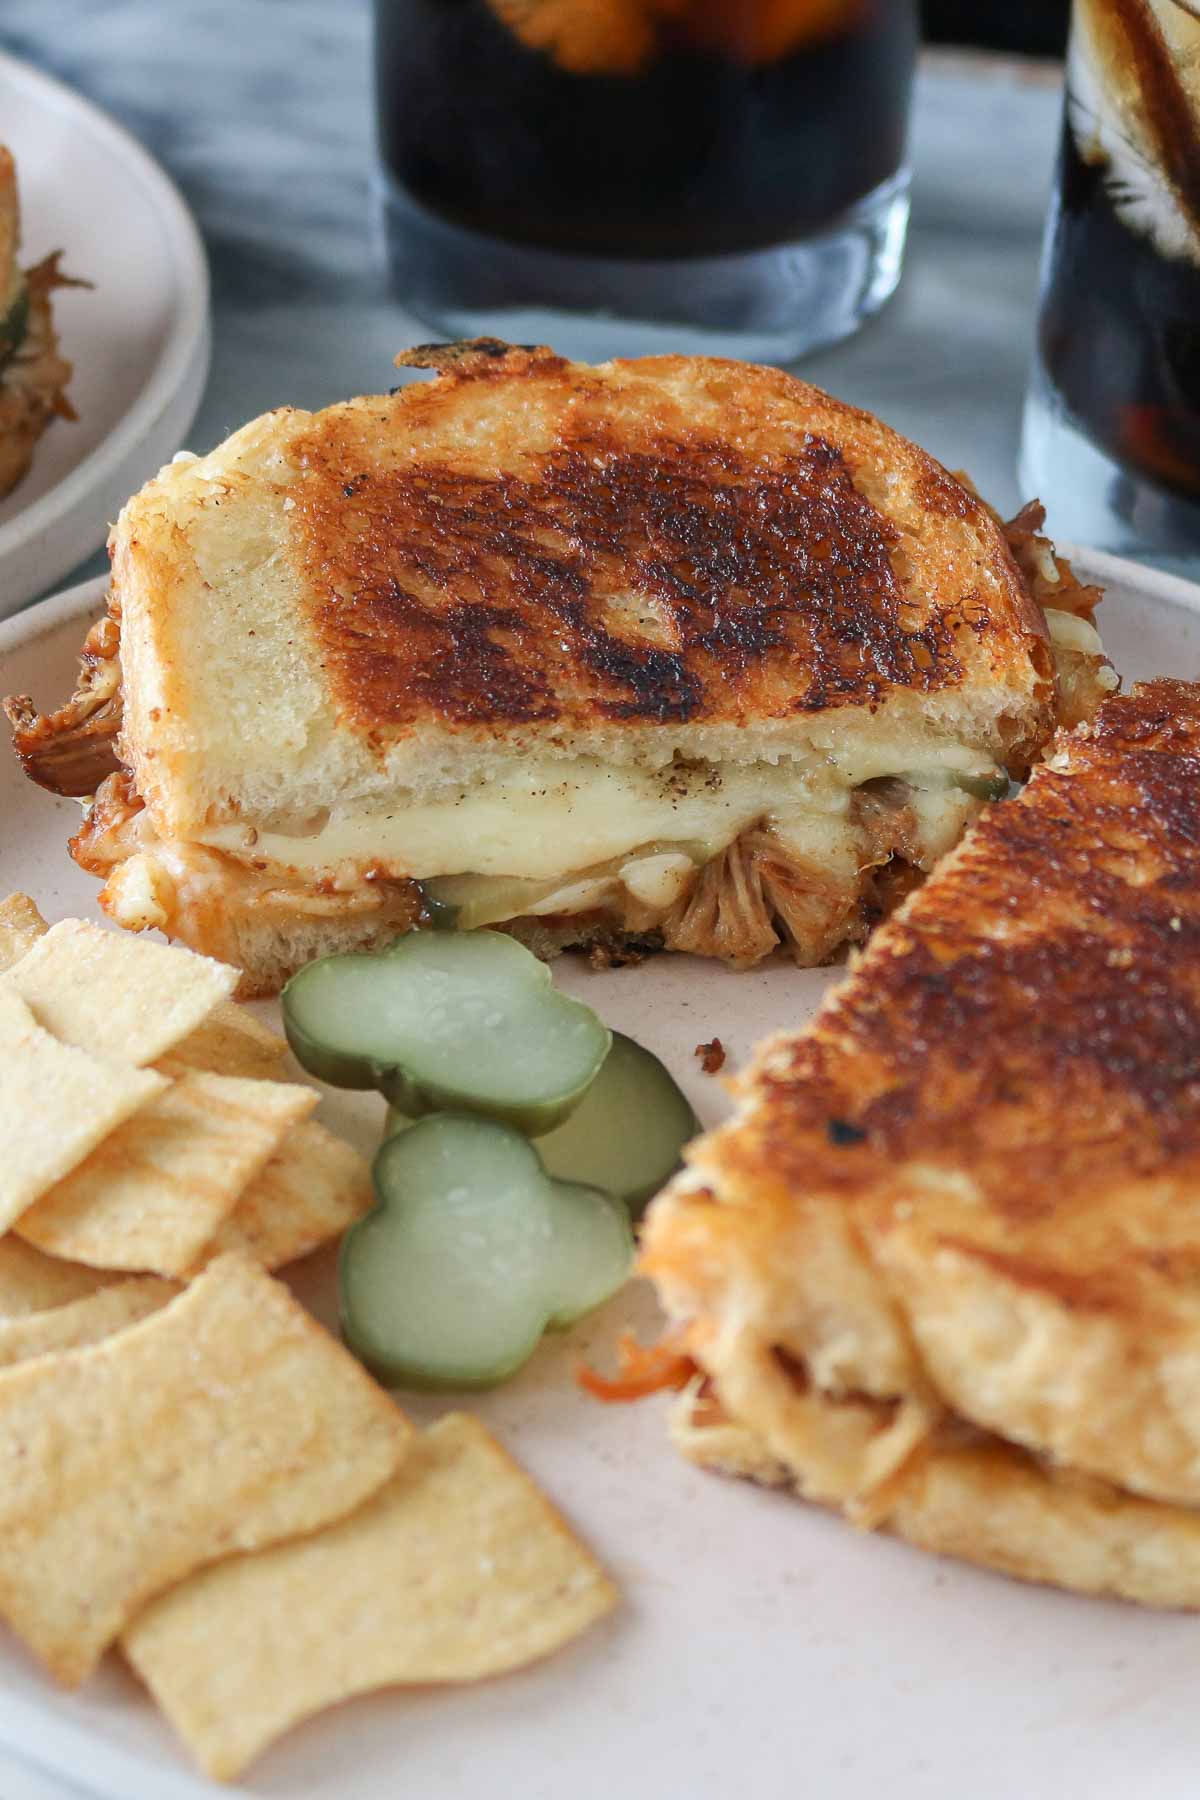 Two halves of a pulled pork grilled cheese sandwich on a plate with chips and pickle slices.